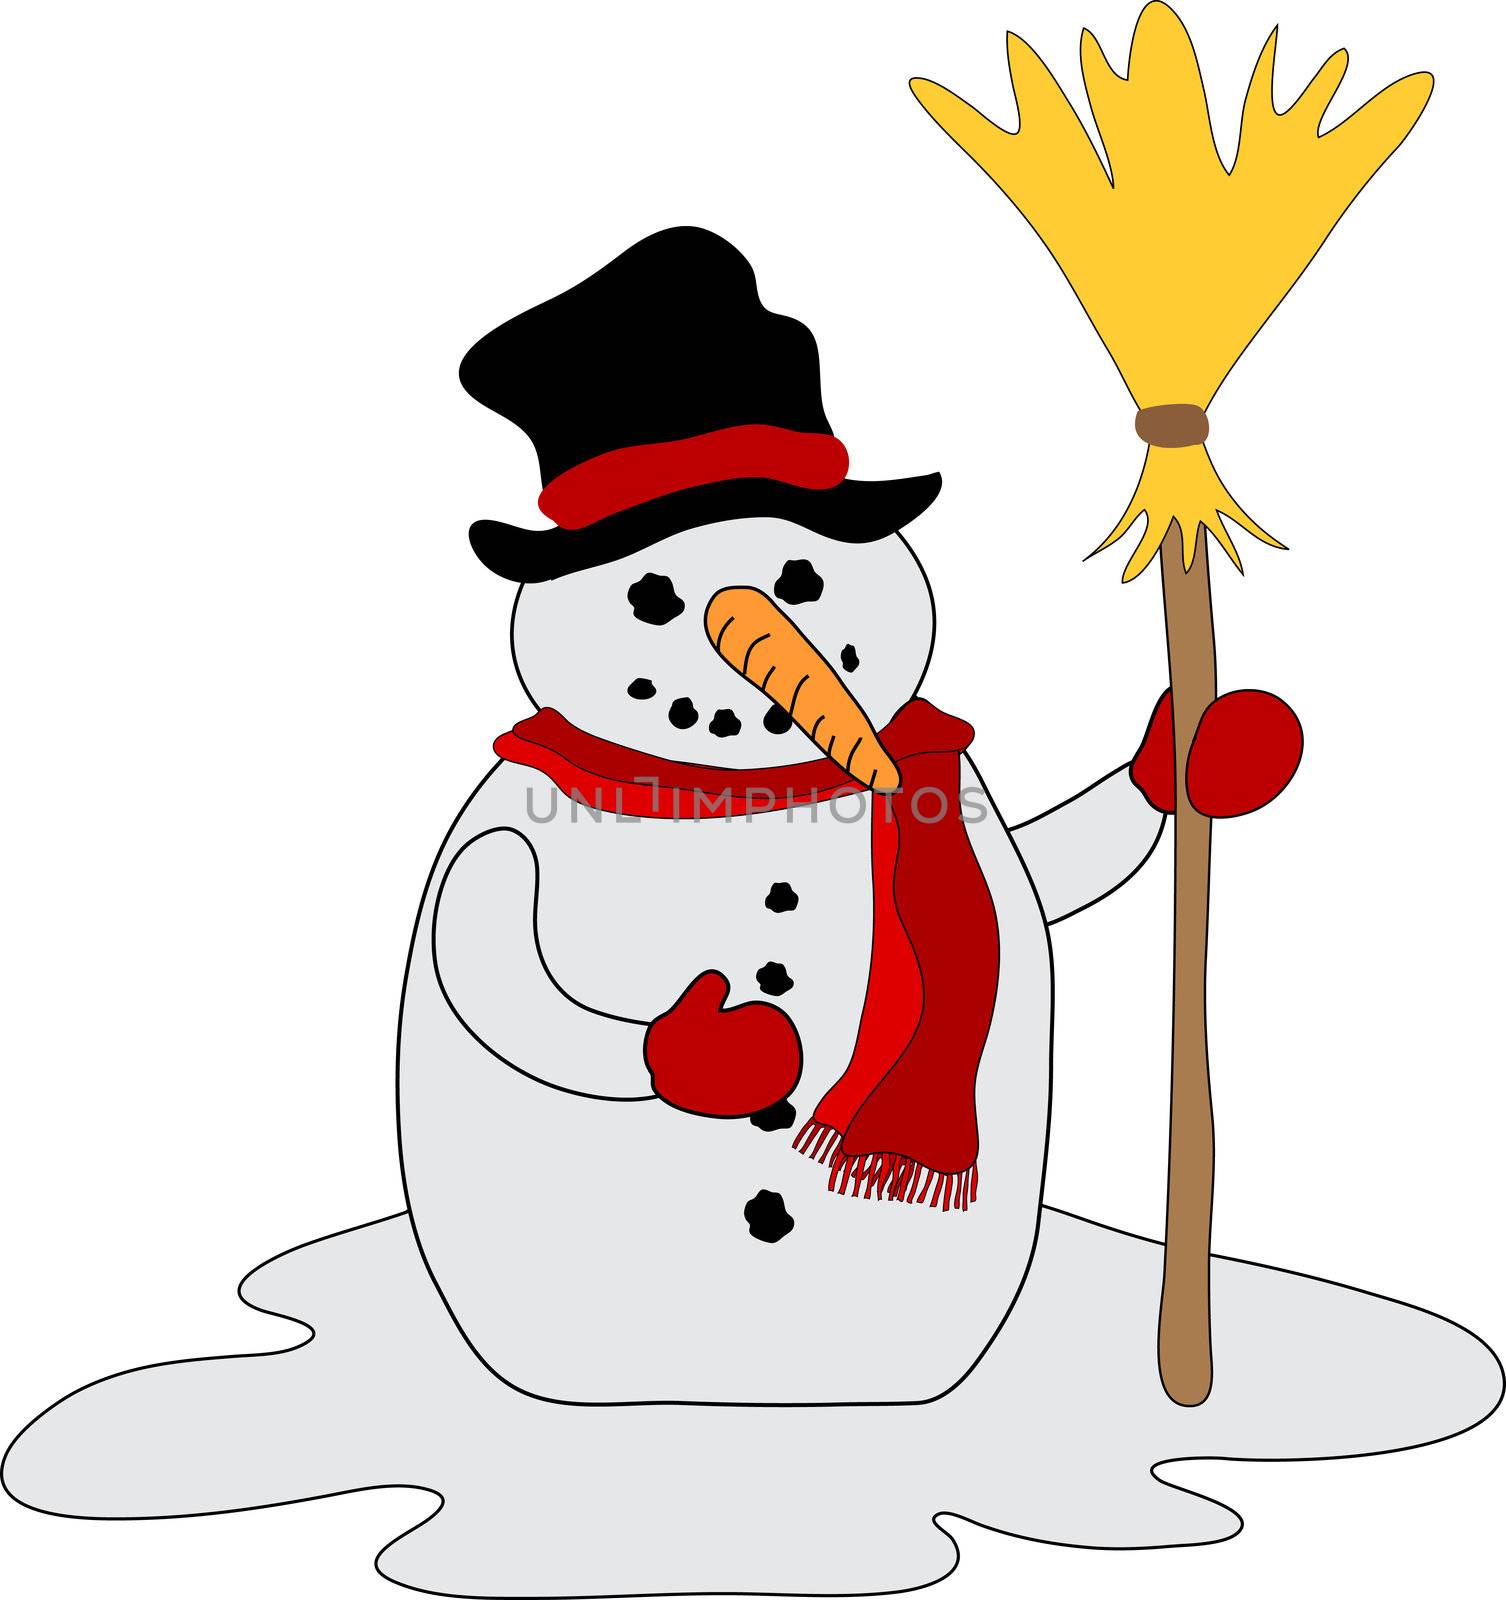 Snowman with broom